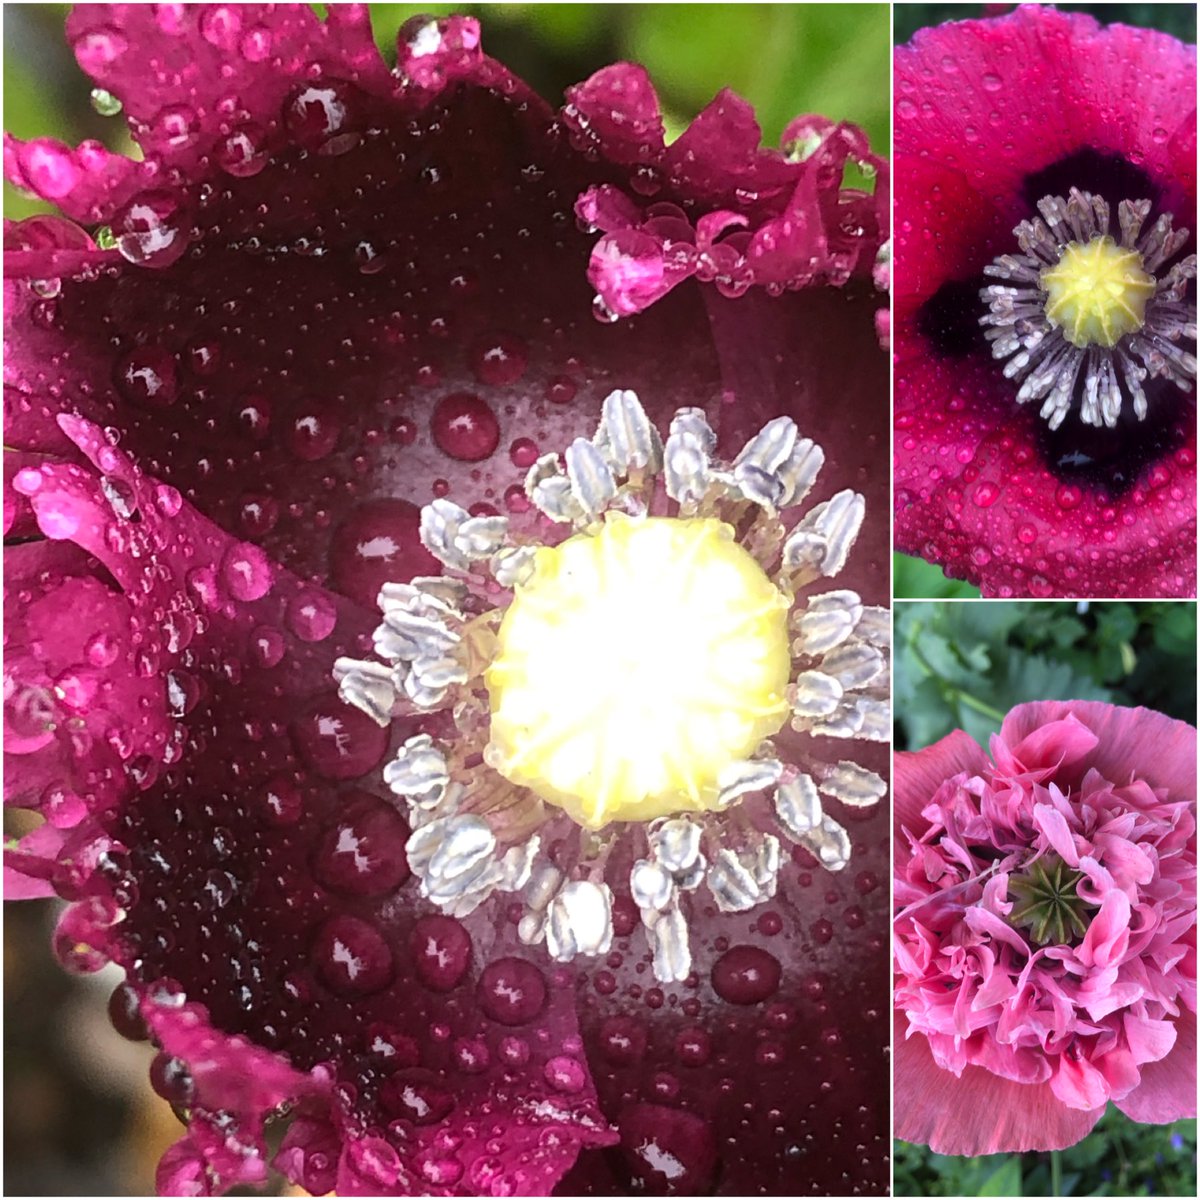 Finally (thanks for bearing with me) the sixth has to be the final blooms of the self-seeded poppies that have brought colour to the garden for many weeks now. Glistening with beads of rain this morning.  @cavershamjj  #SixonSaturday 6/6